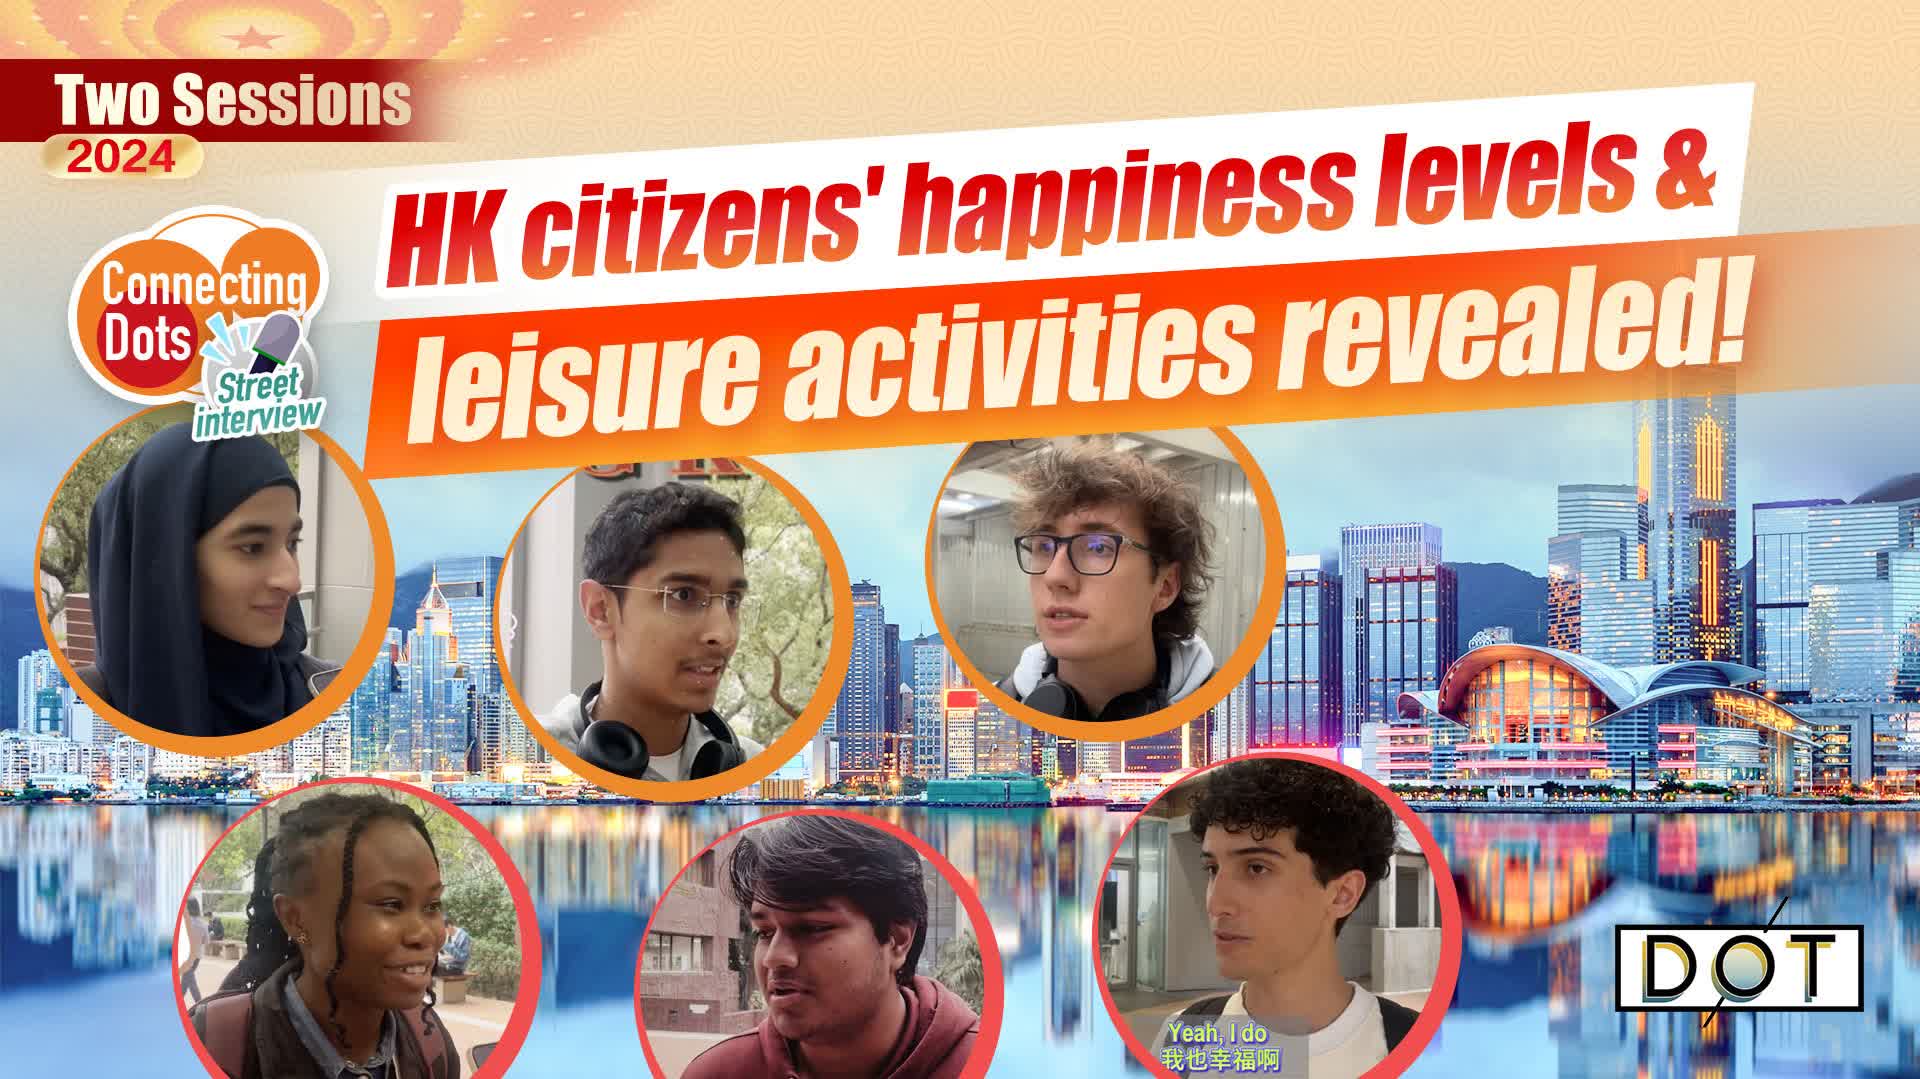 Connecting Dots | HK citizens' happiness levels & leisure activities revealed!